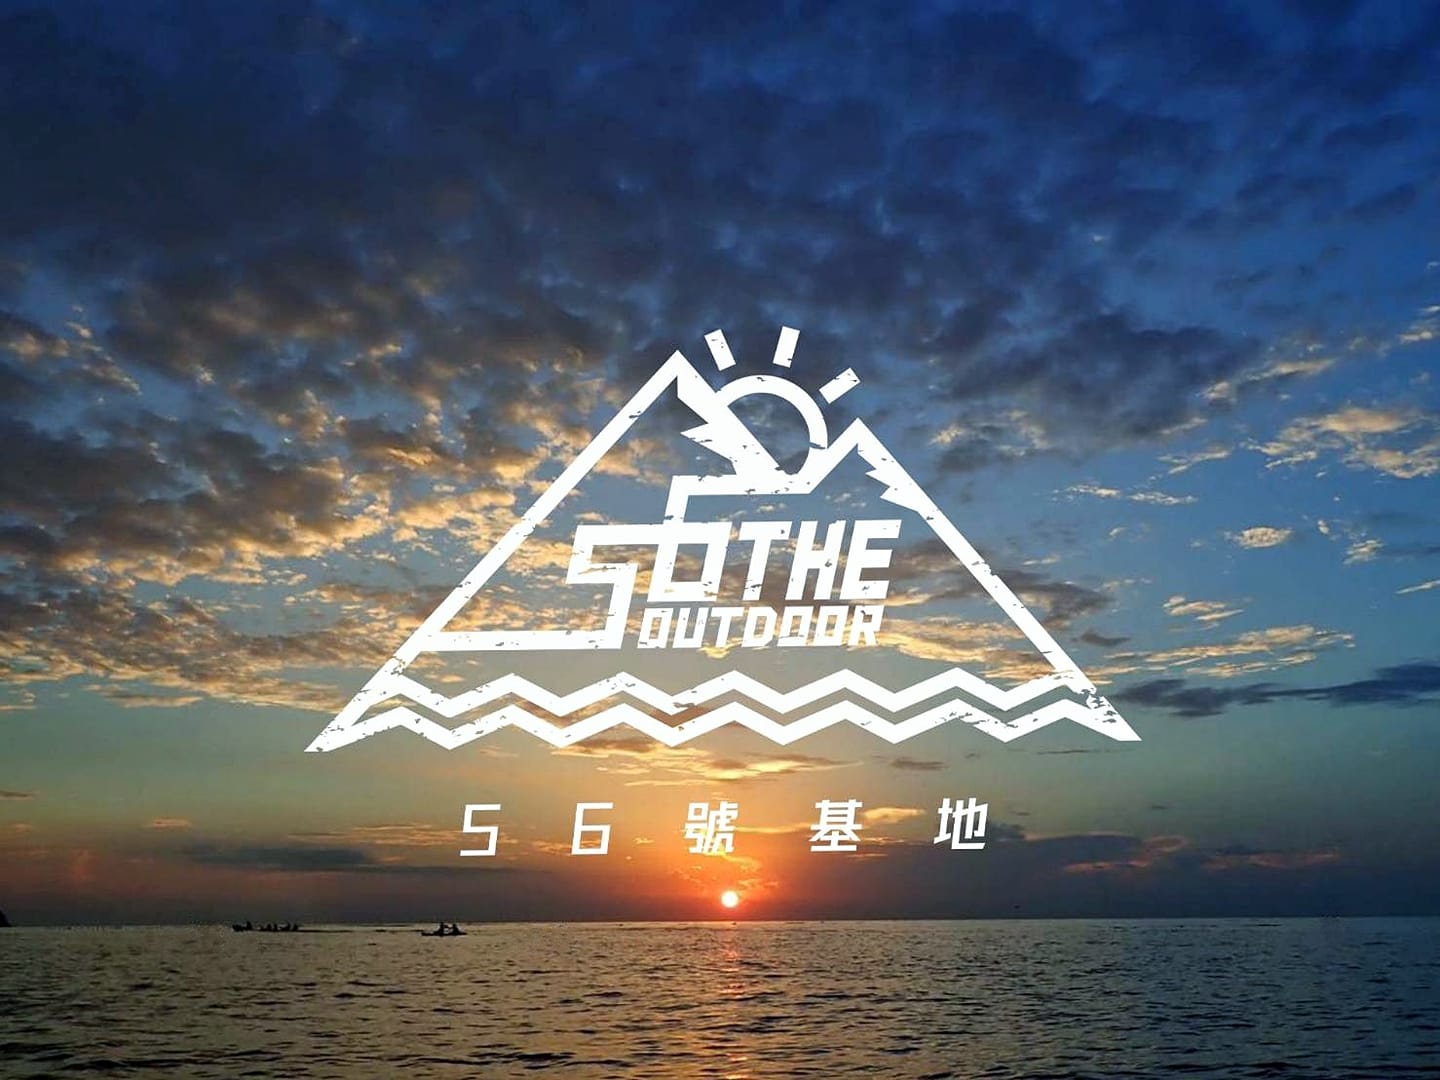 [Review of No. 56 Base] A secret base for outdoor activities in Hualien, with knowledgeable coaches taking you SUP 2